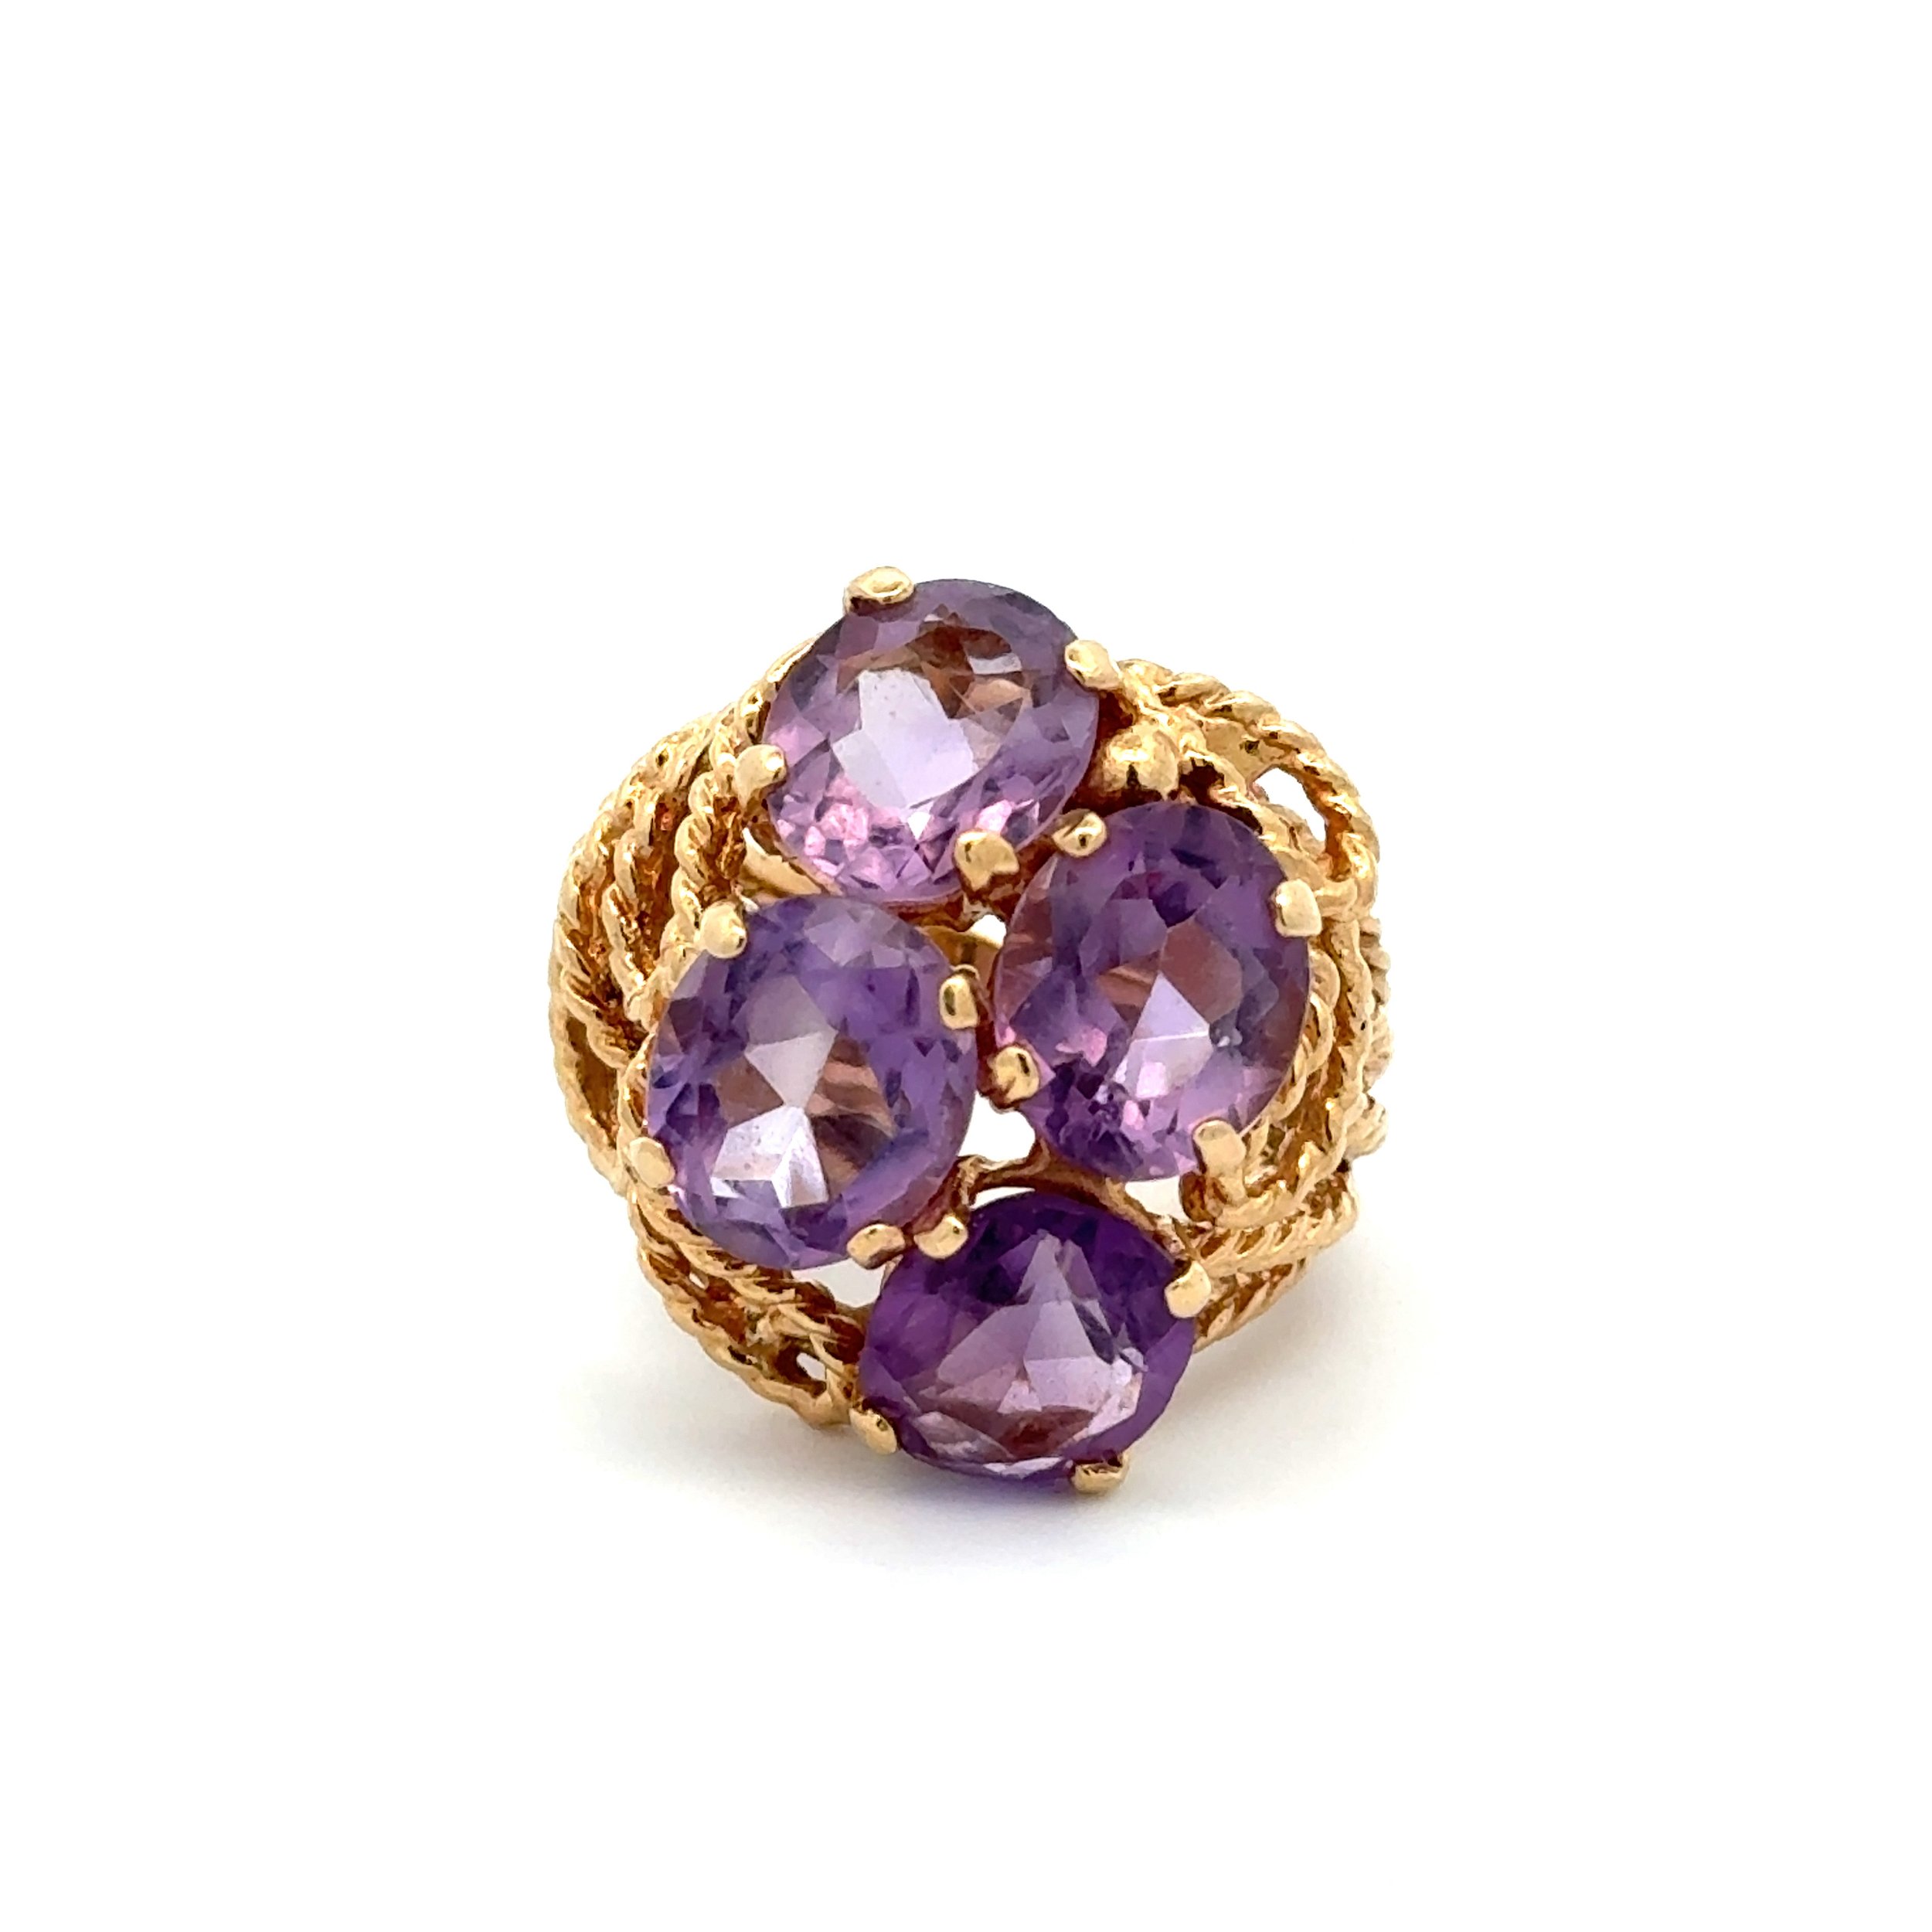 14K YG 1960's Rope Swirl 8.00tcw 4 Oval Amethyst Dome Ring 11.5g, s7